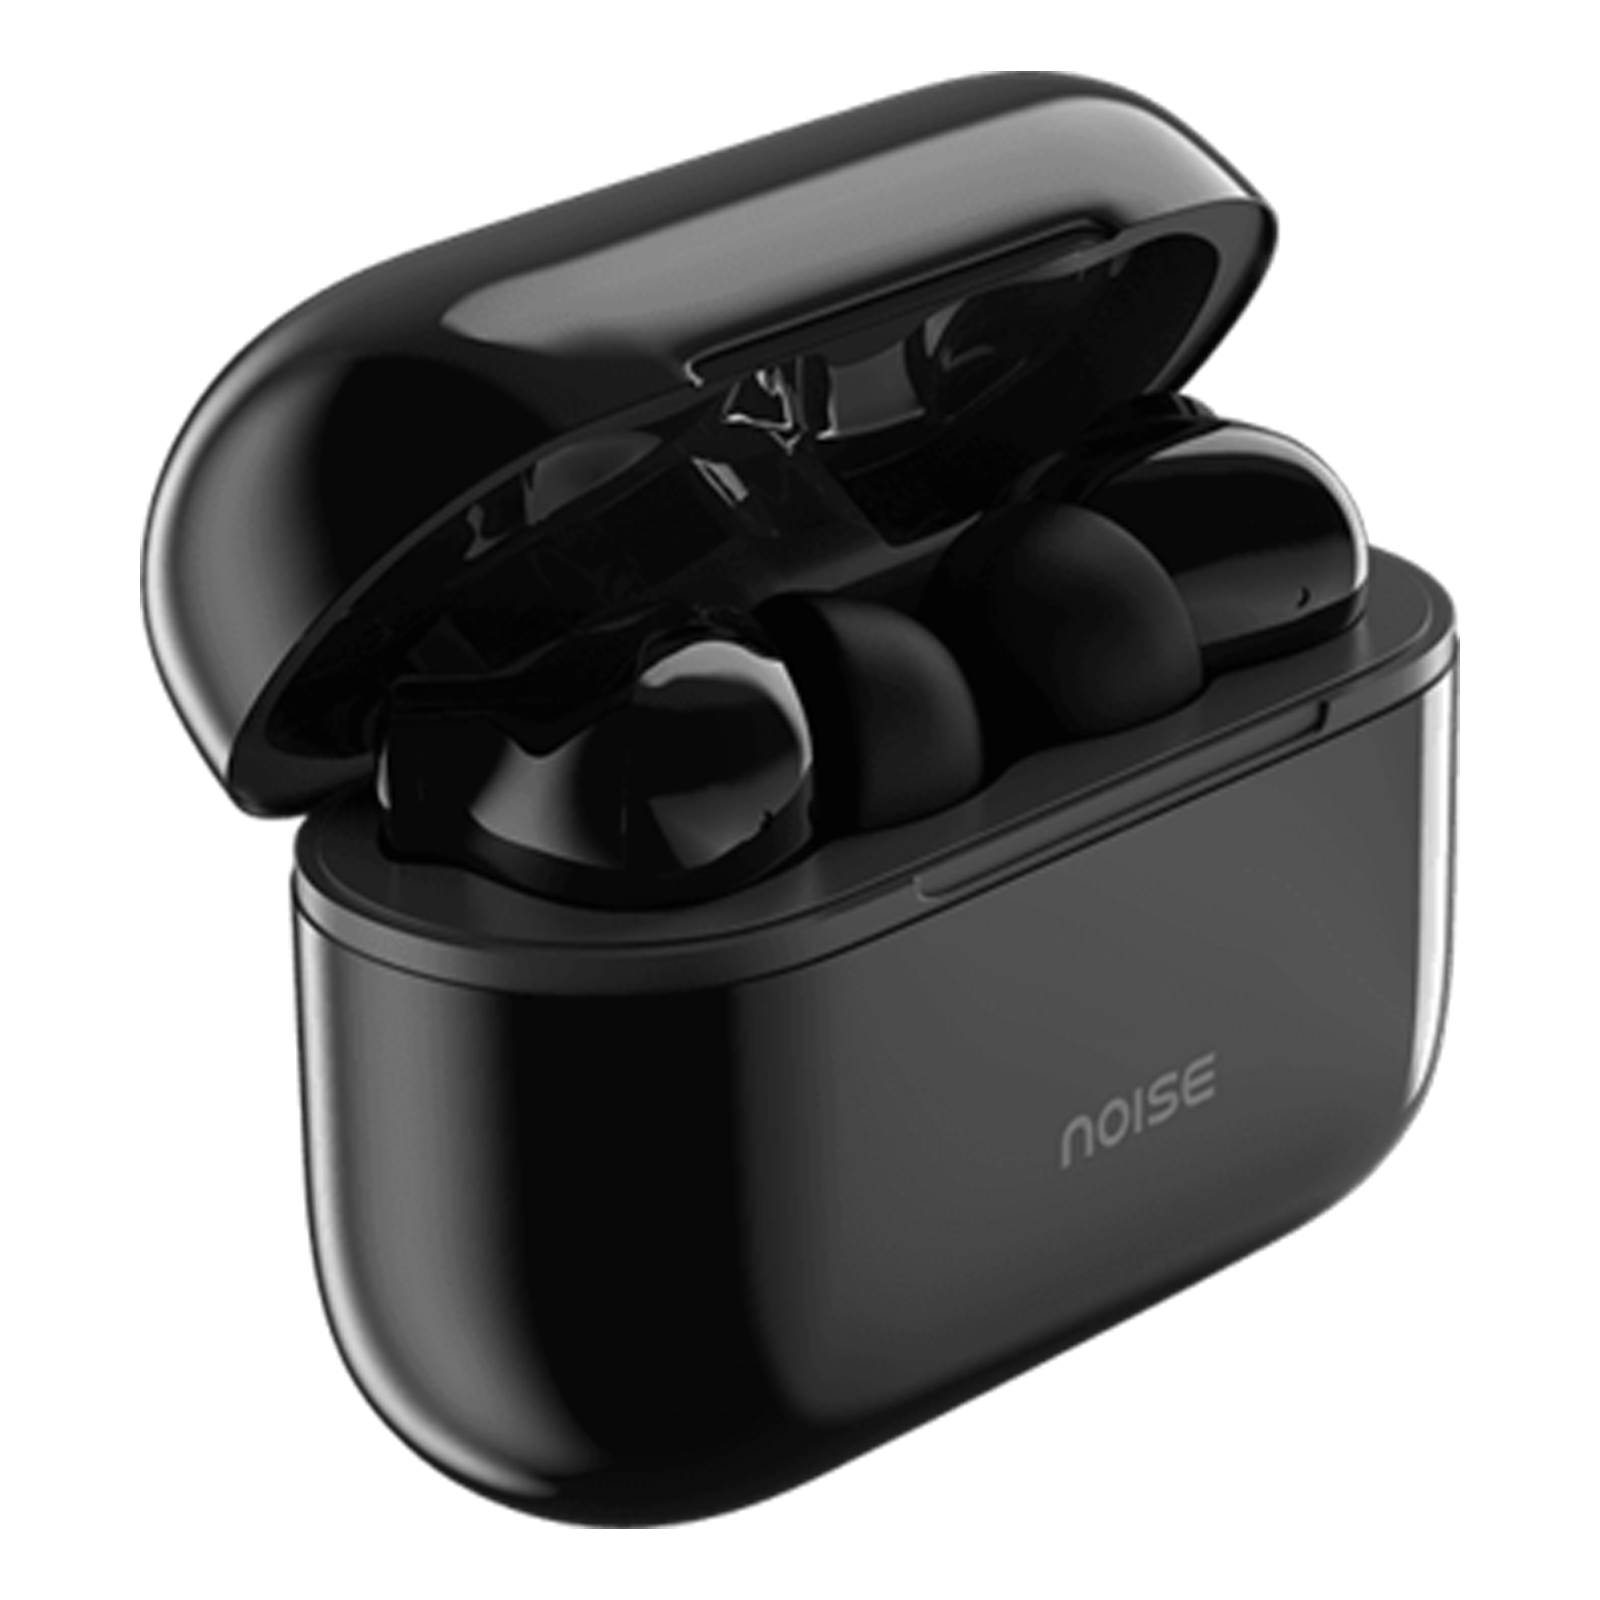 Noise Buds AUD-HDPHN-BUDSVS10 In-Ear Truly Wireless Earbuds with Mic (Bluetooth 5.1, Water resistant, Jet Black)_1